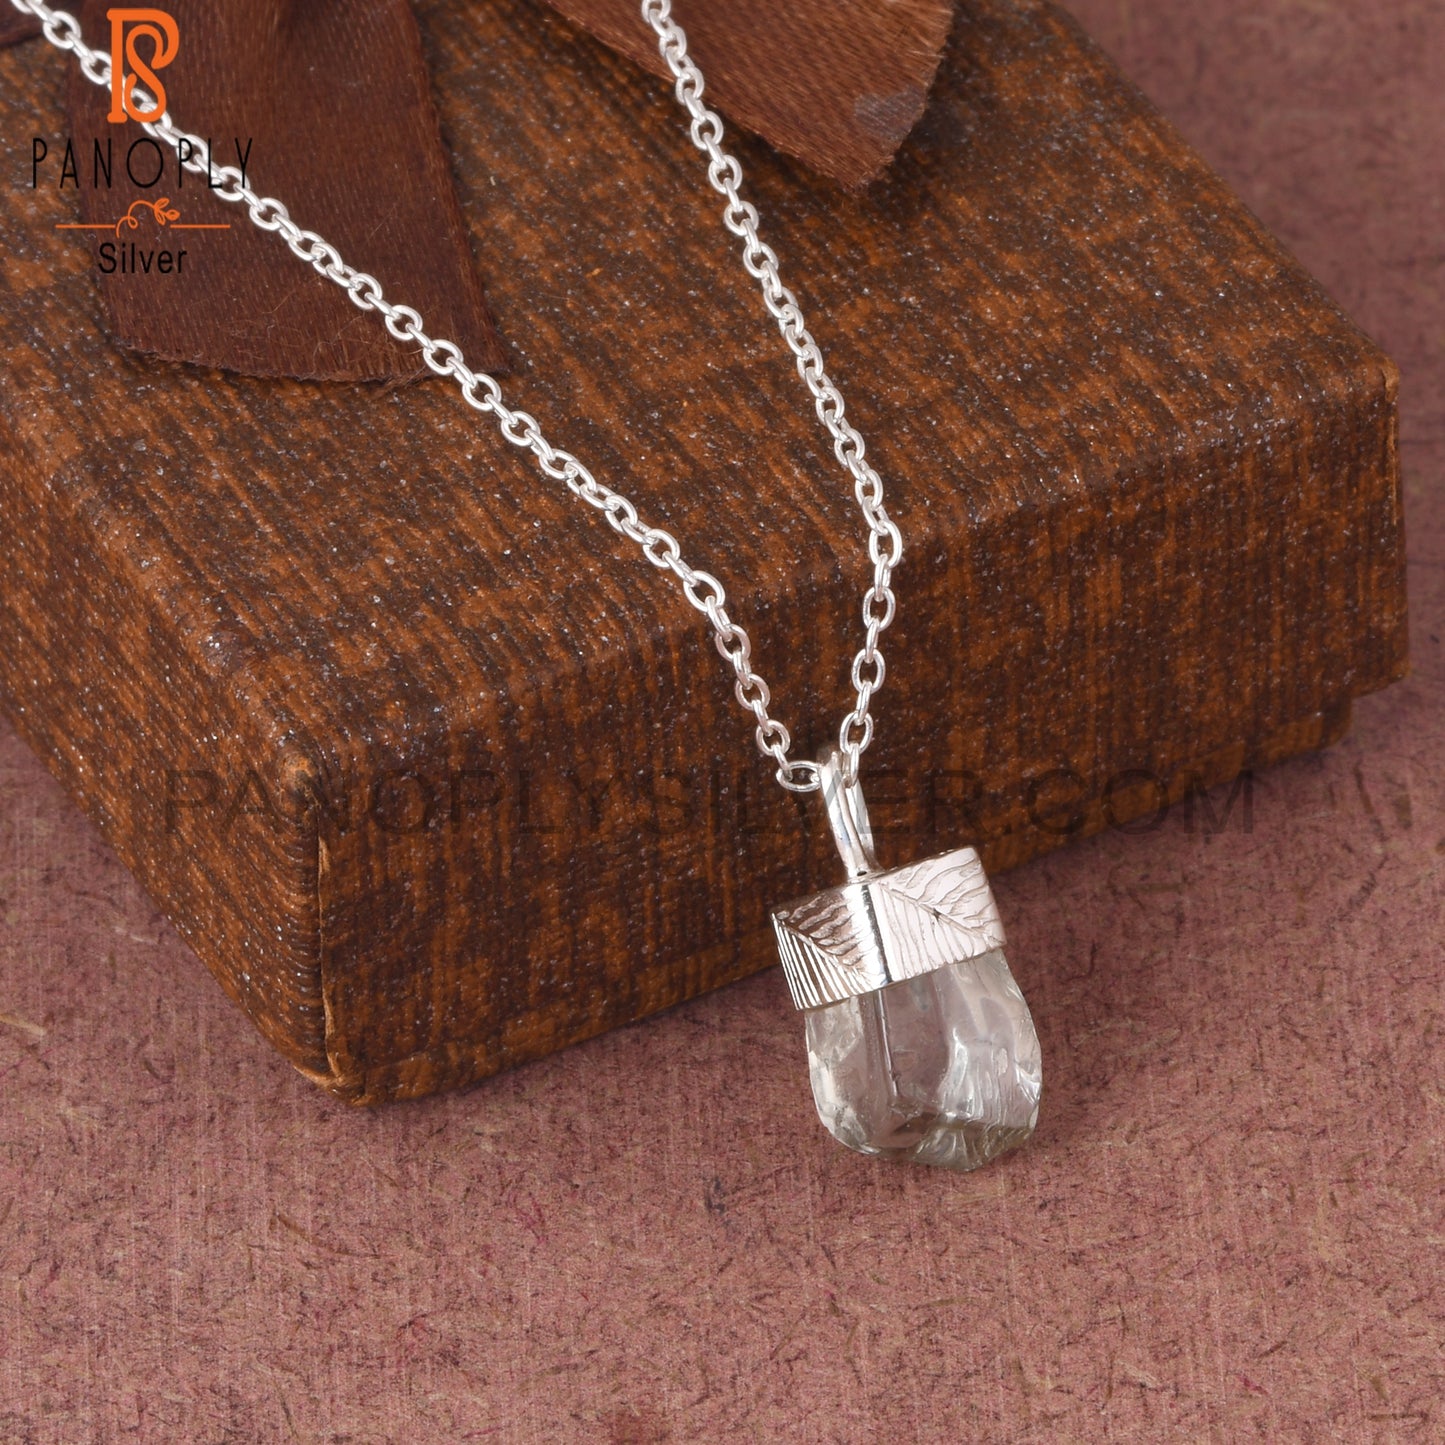 Green Amethyst 925 Sterling Silver Pendant With Chain